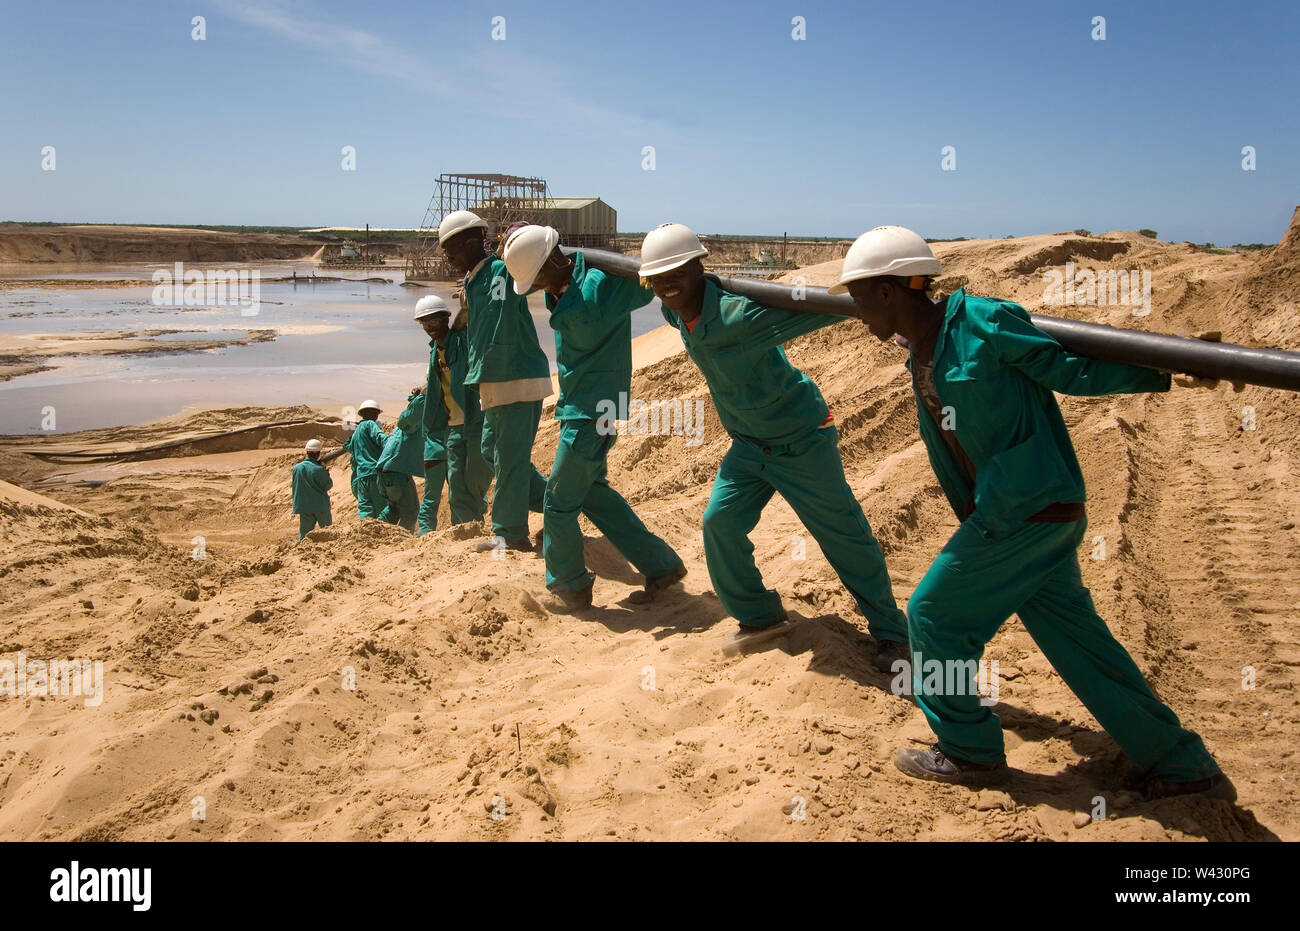 Mining, managing & transporting of titanium mineral sands. Maintenance team laying new power cables at the side of mining pond for wet plant behind. Stock Photo